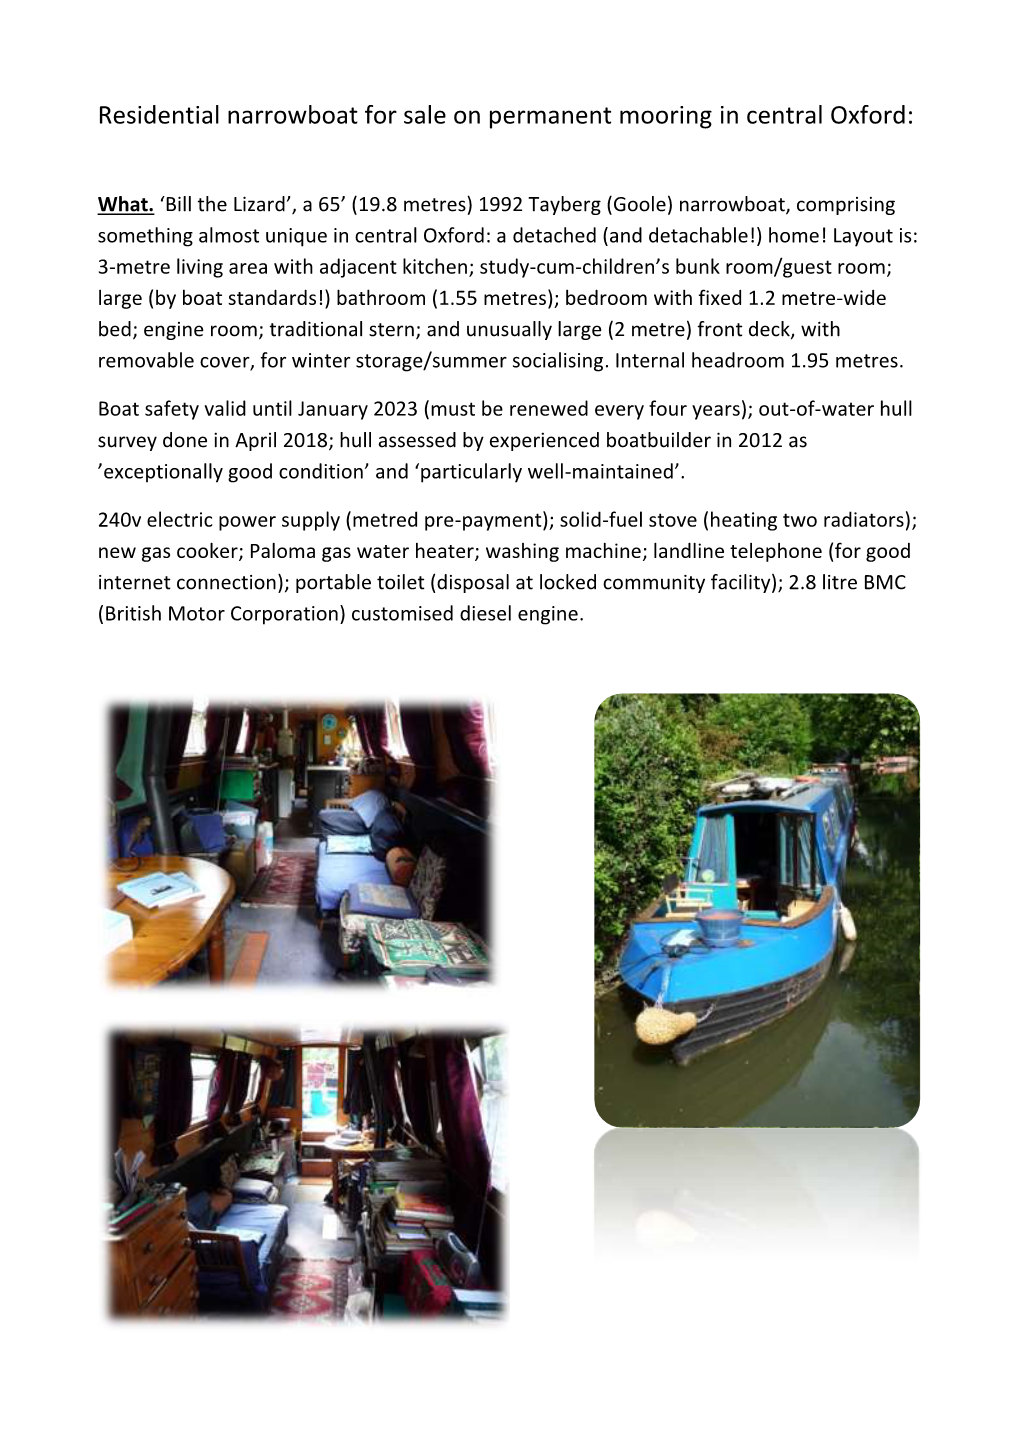 Residential Narrowboat for Sale on Permanent Mooring in Central Oxford